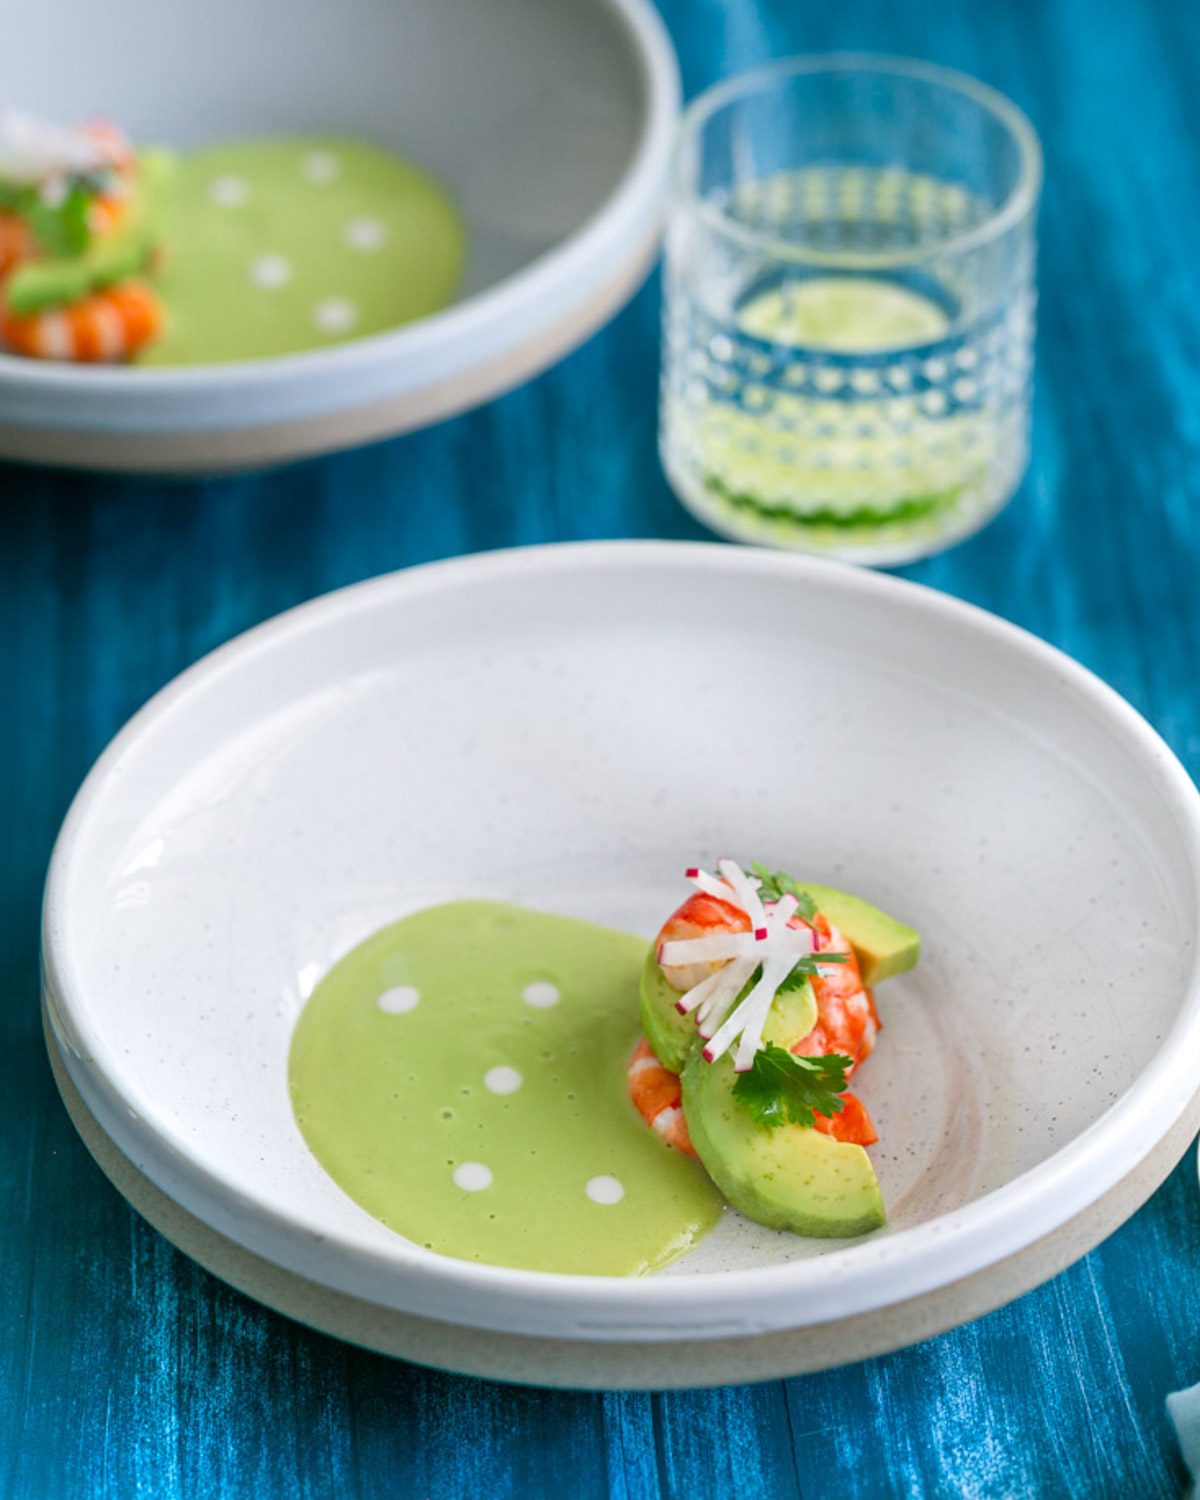 Chilled avocado apple soup with prawns